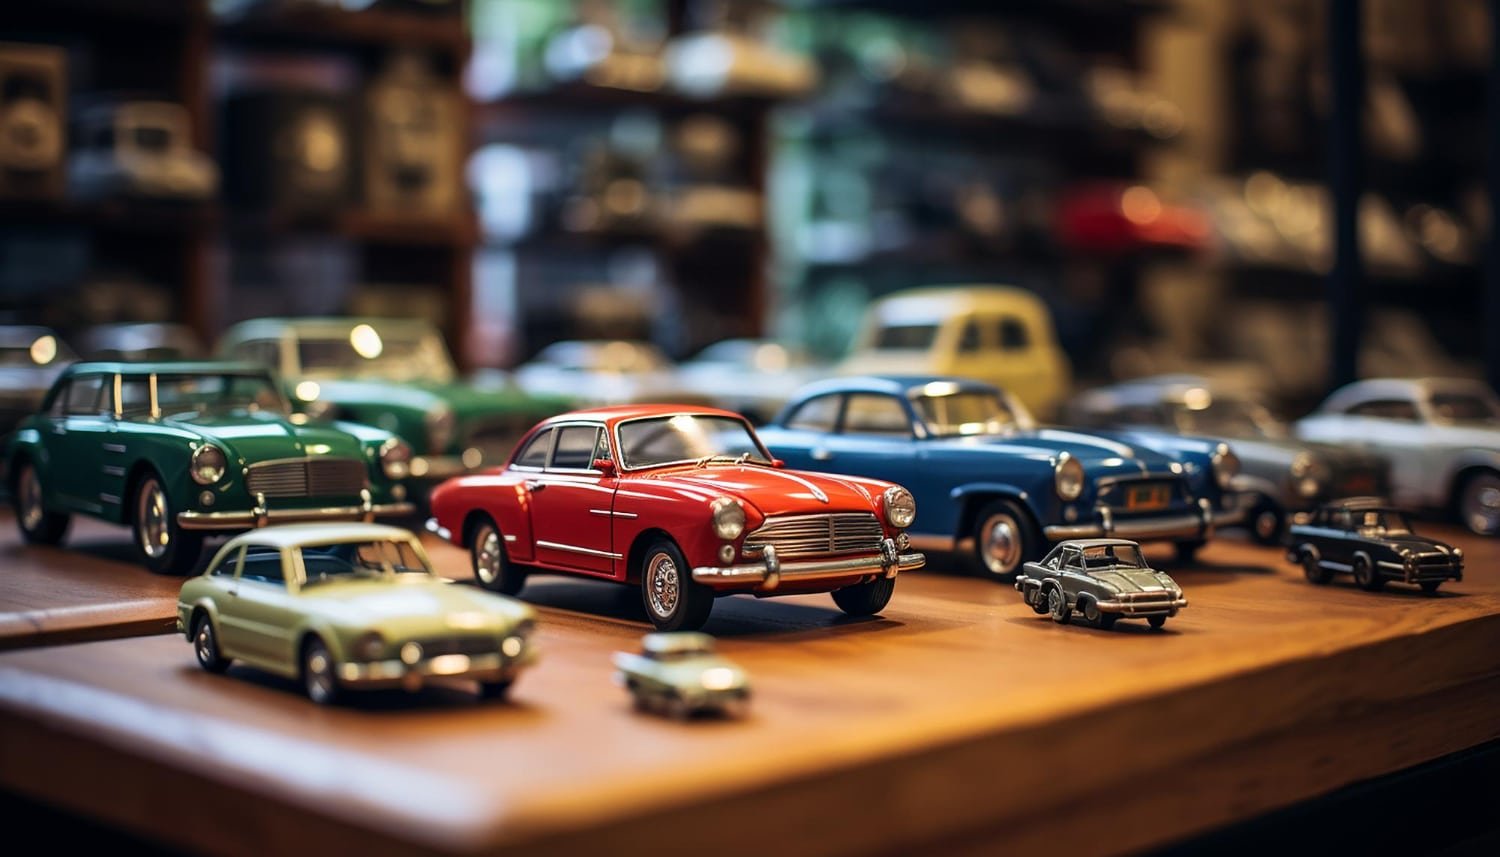 Model Car Collectibles with Auto World Store: Diecast Cars and Racing Memorabilia in 2024